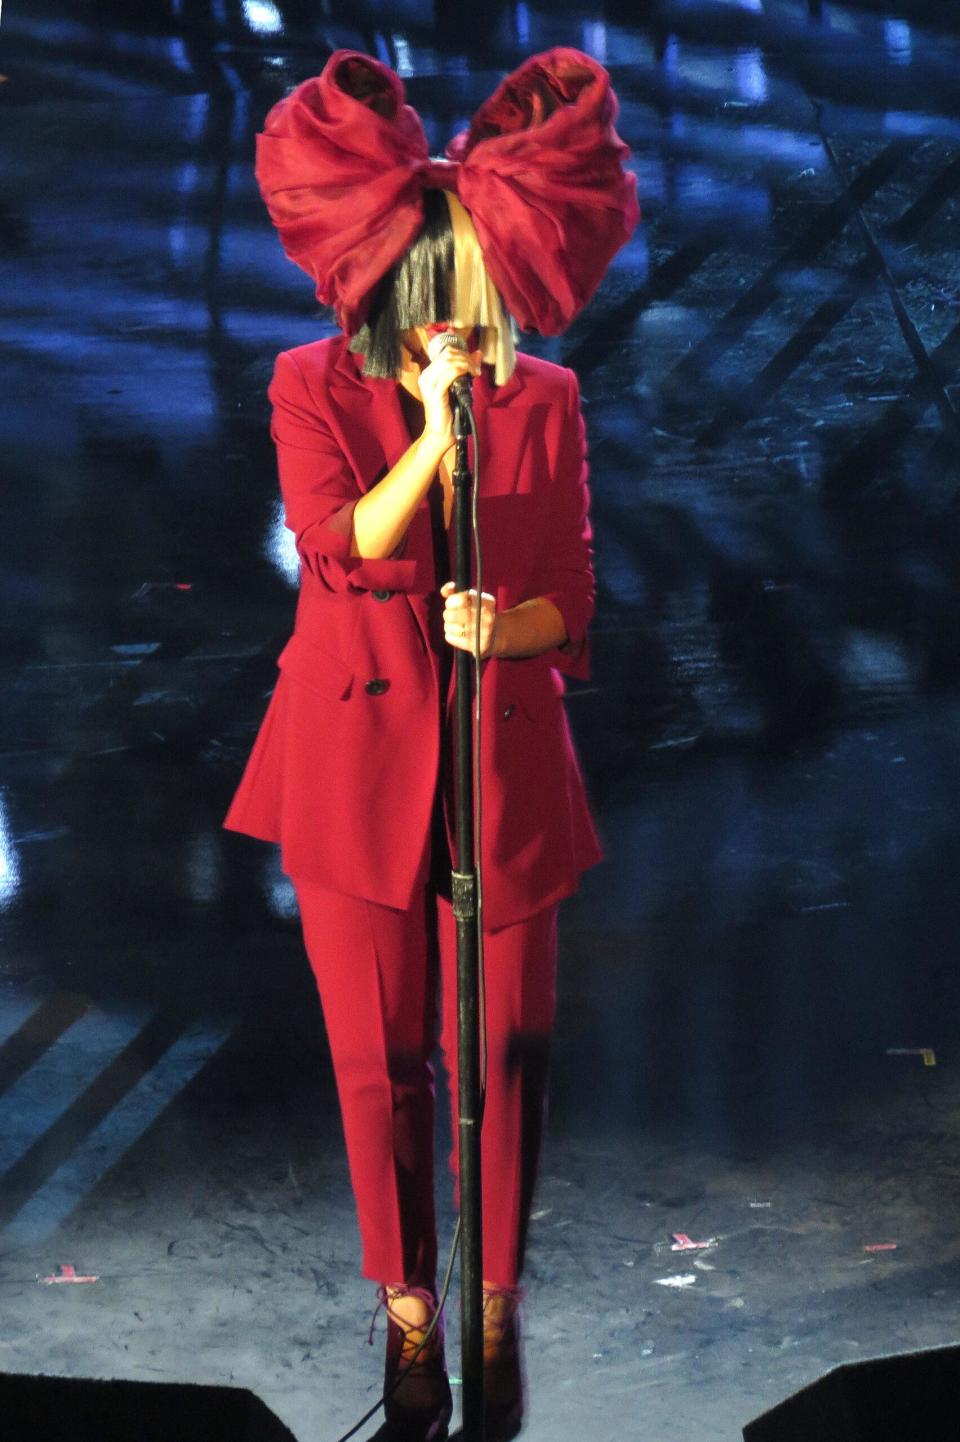 Sia performs on stage.